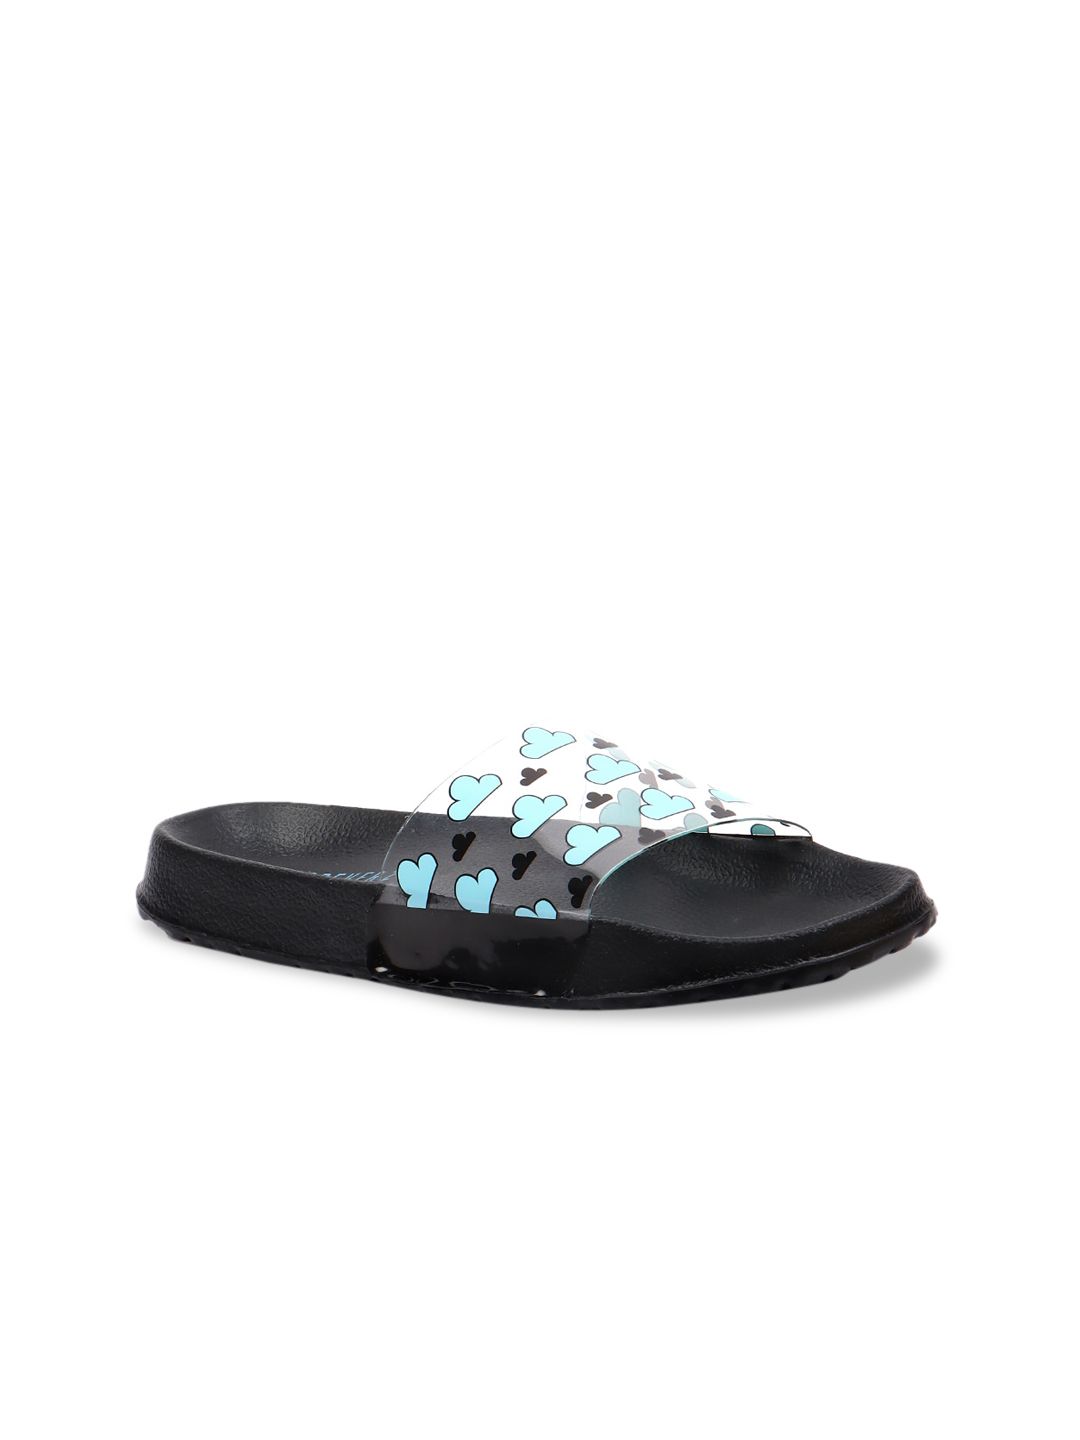 FOREVER 21 Women Black & Turquoise Blue Printed Sliders Price in India